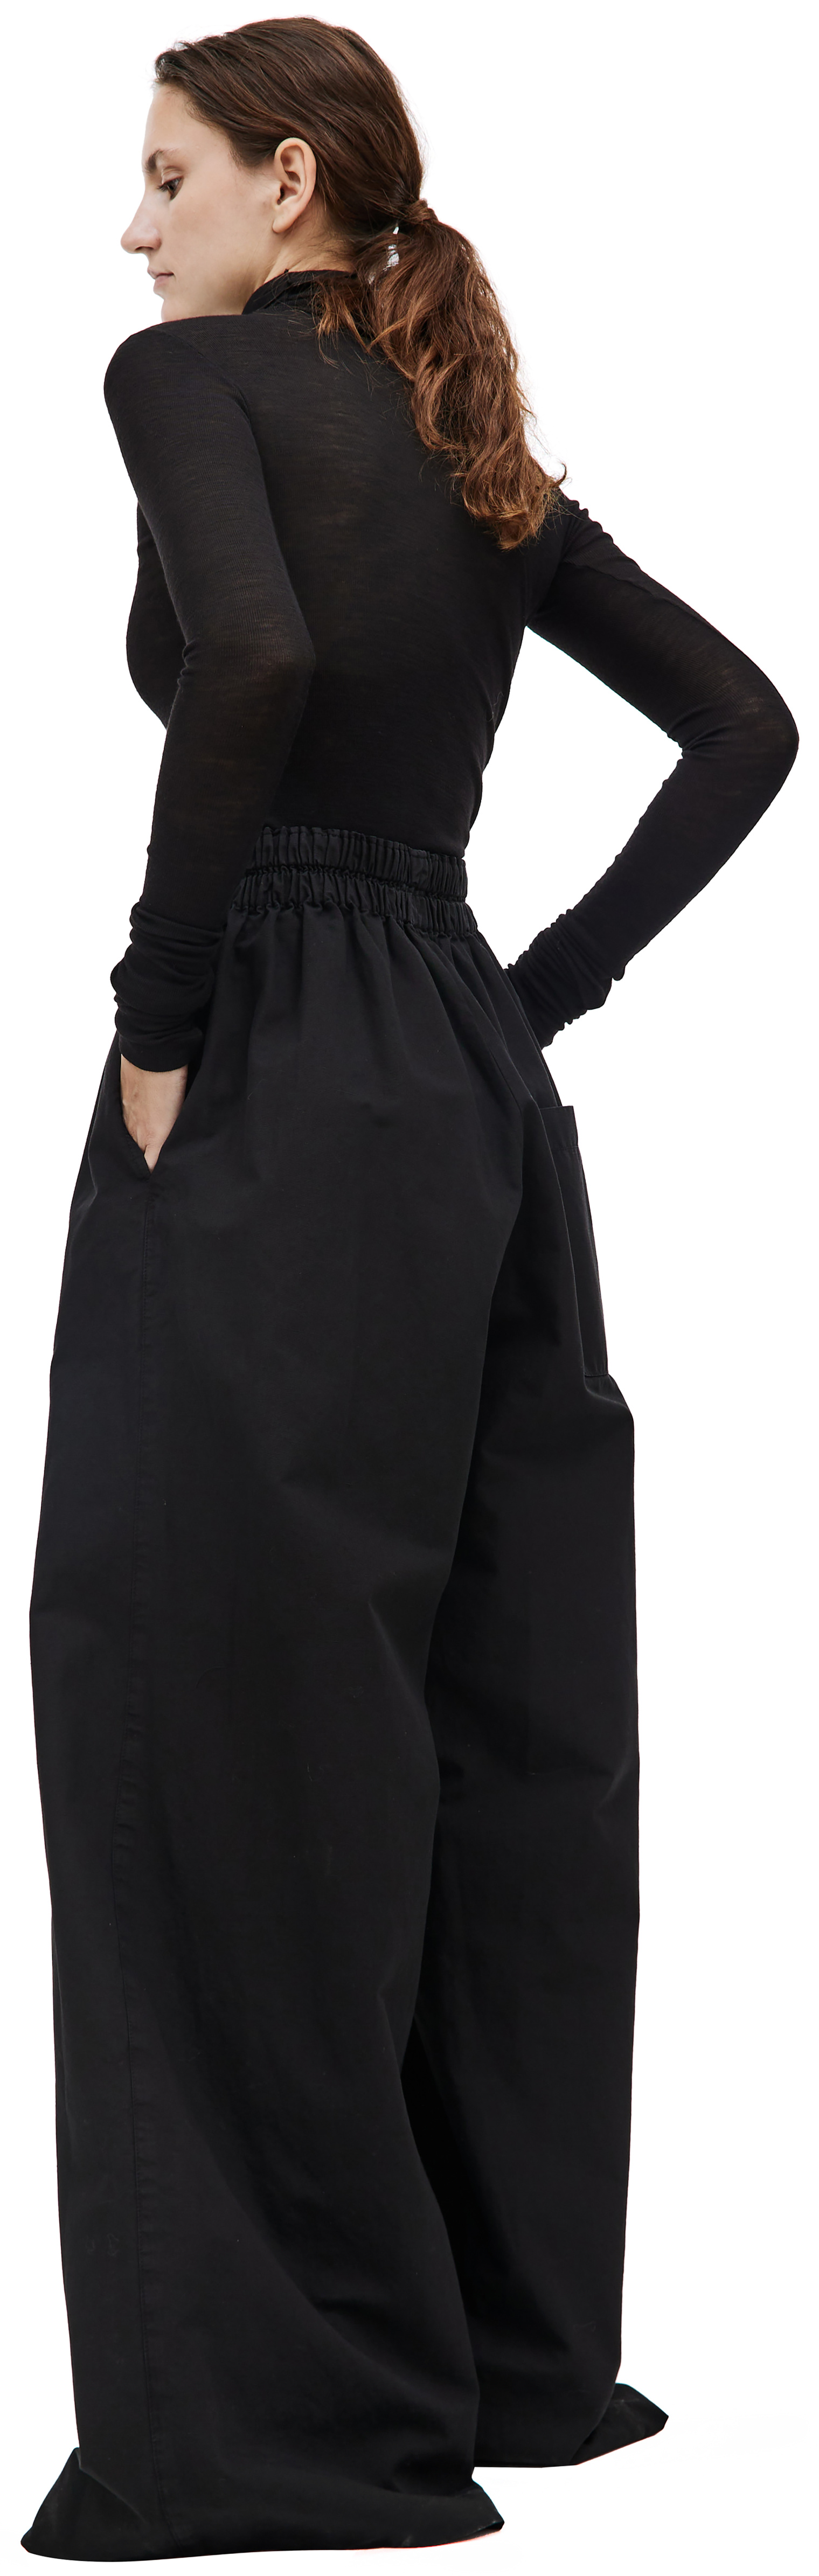 QUIRA Black oversized trousers